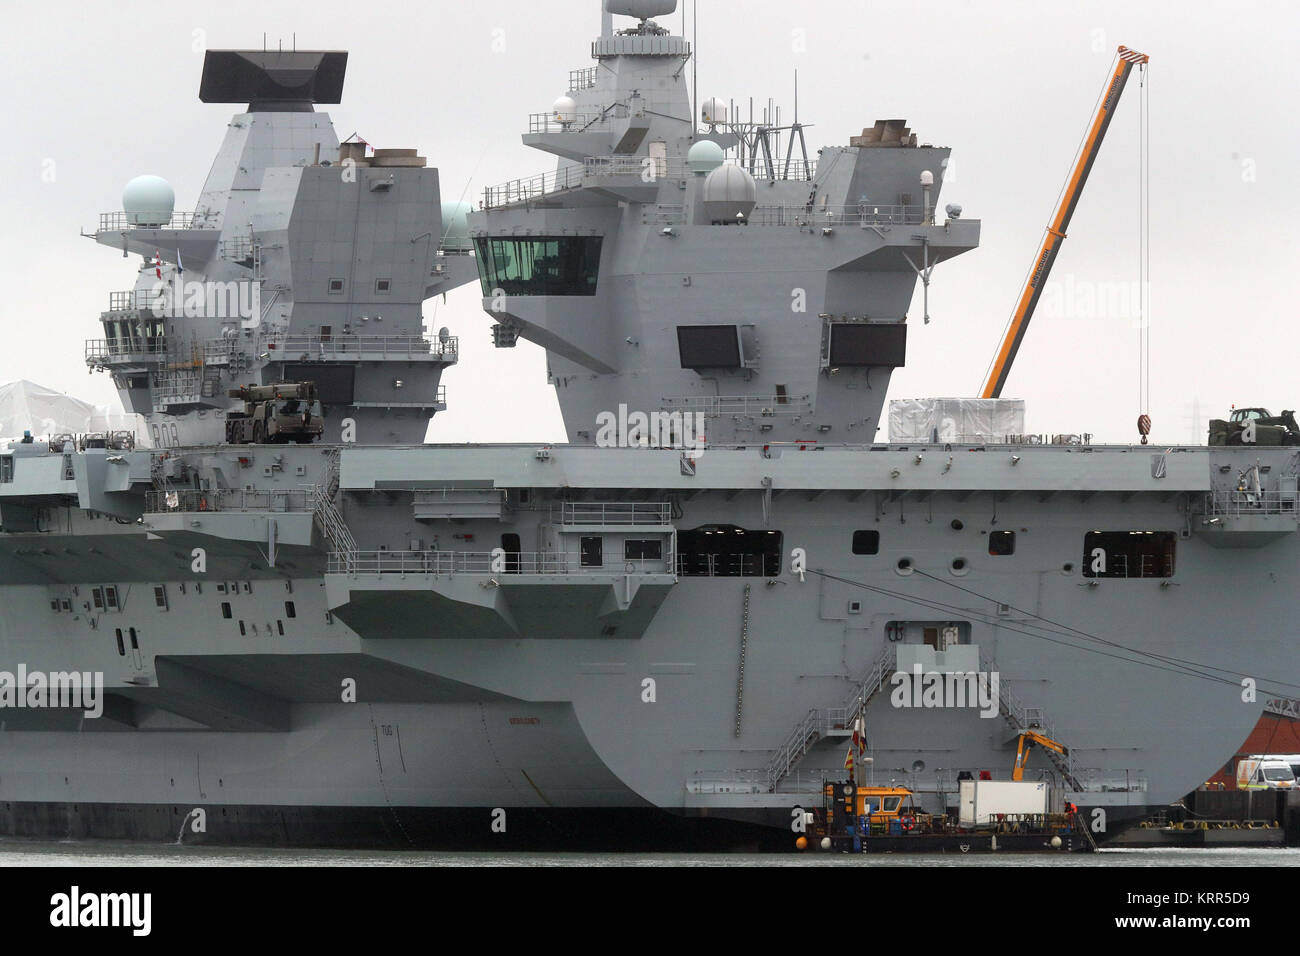 A Multicat support vessel at the stern of HMS Queen Elizabeth, after it was announced there was a leak from one of her propeller shafts. Stock Photo